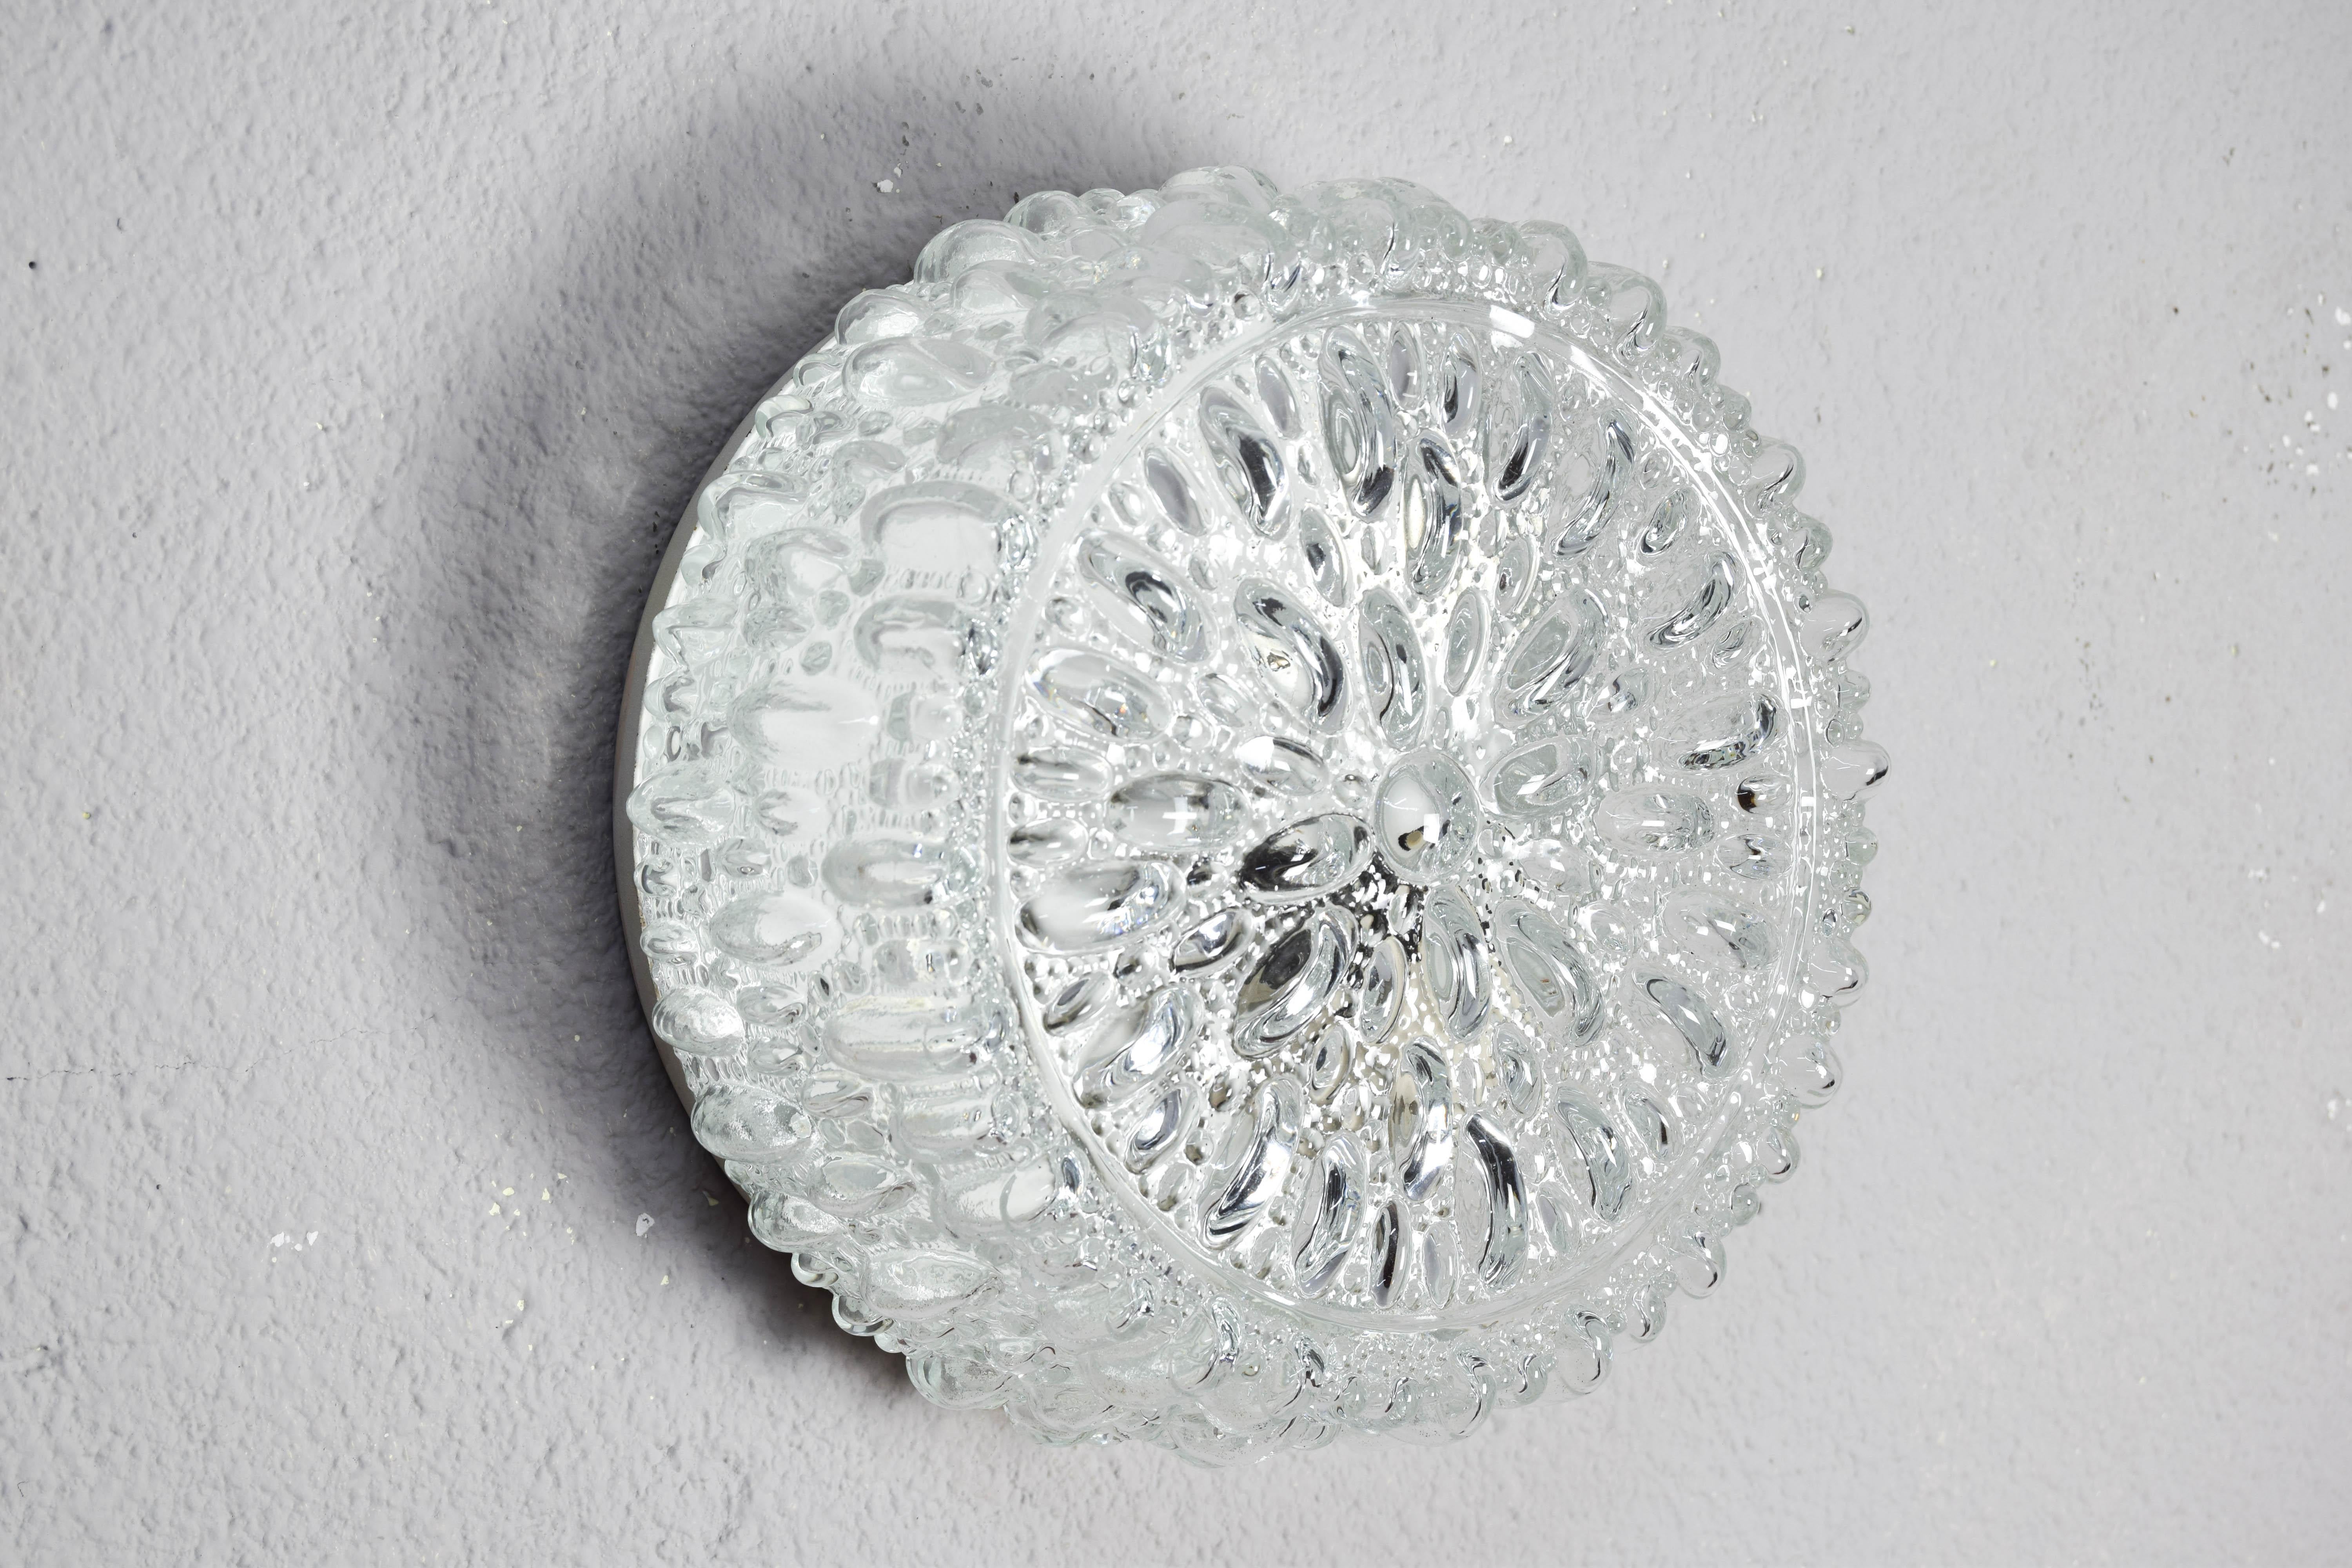 Vintage flush mount ceiling light designed and manufactured by Glashütte Limburg 1960s. 26 cm in diameter, 11 cm high.
This 1960's glass flush mount light can also be used as a wall sconce.

The lamp is made of thick, heavy crystal glass with a